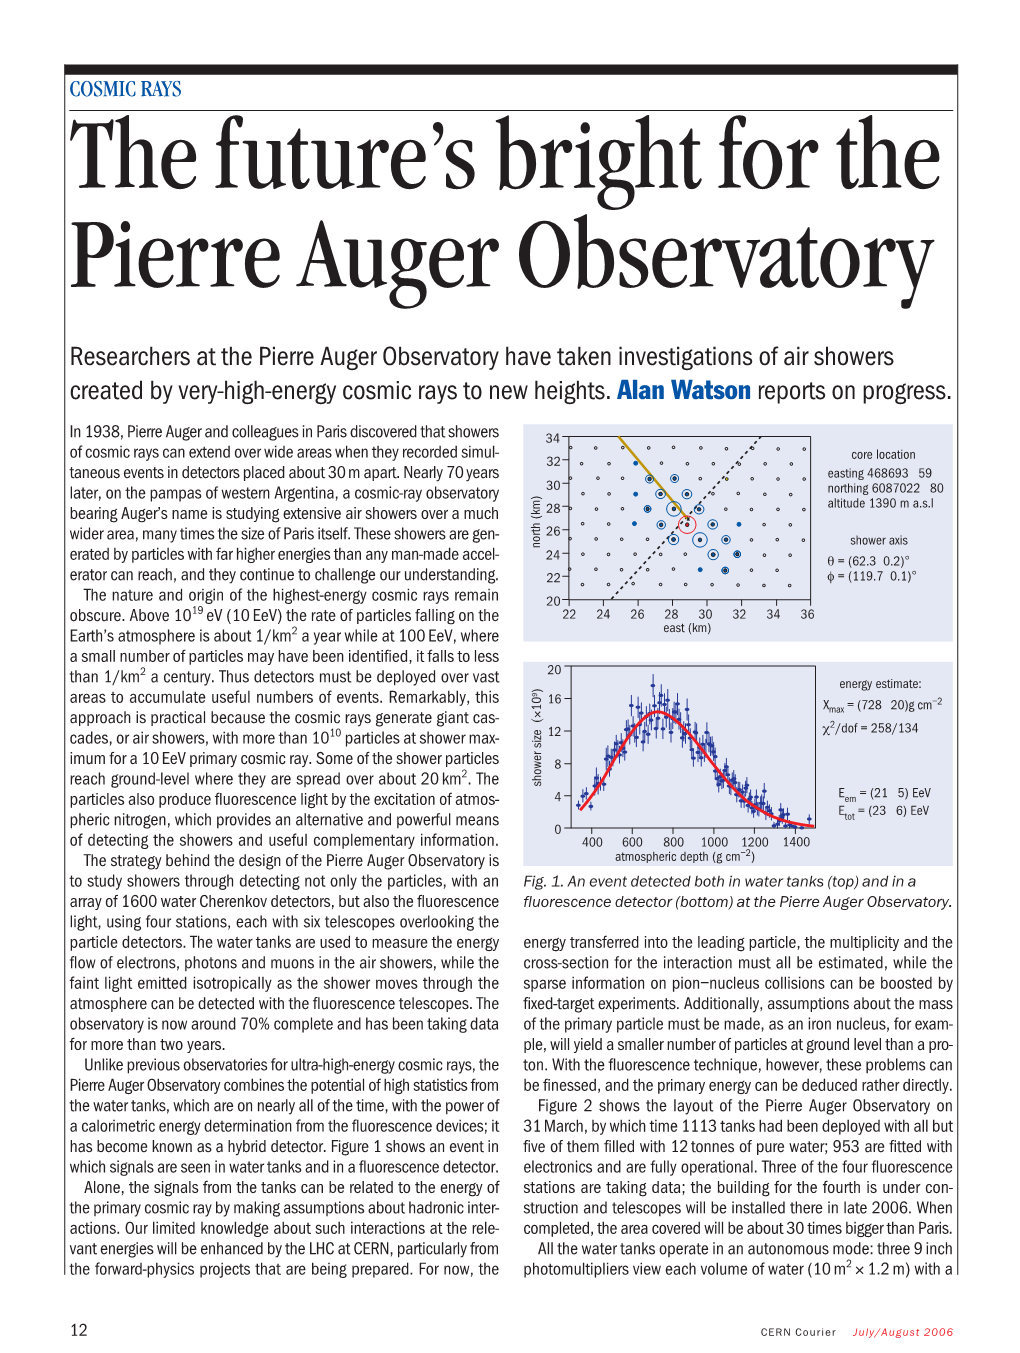 The Future's Bright for the Pierre Auger Observatory